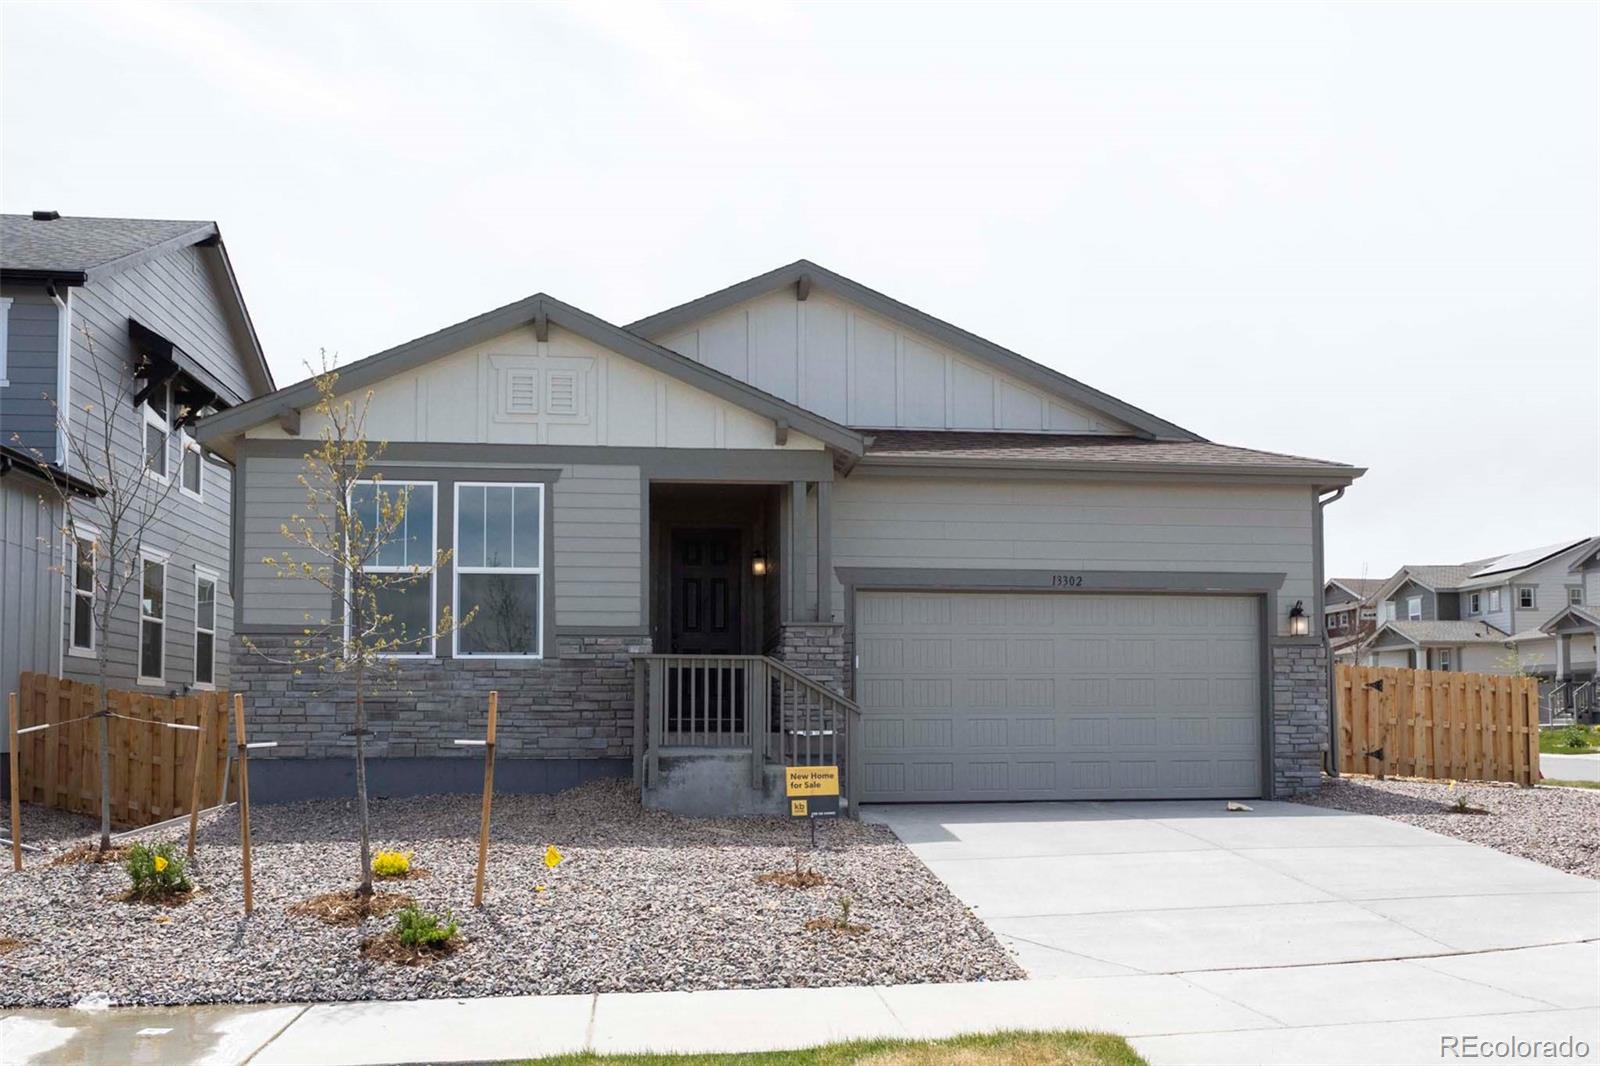 13302 E 110th Way, commerce city MLS: 5490513 Beds: 2 Baths: 2 Price: $608,000